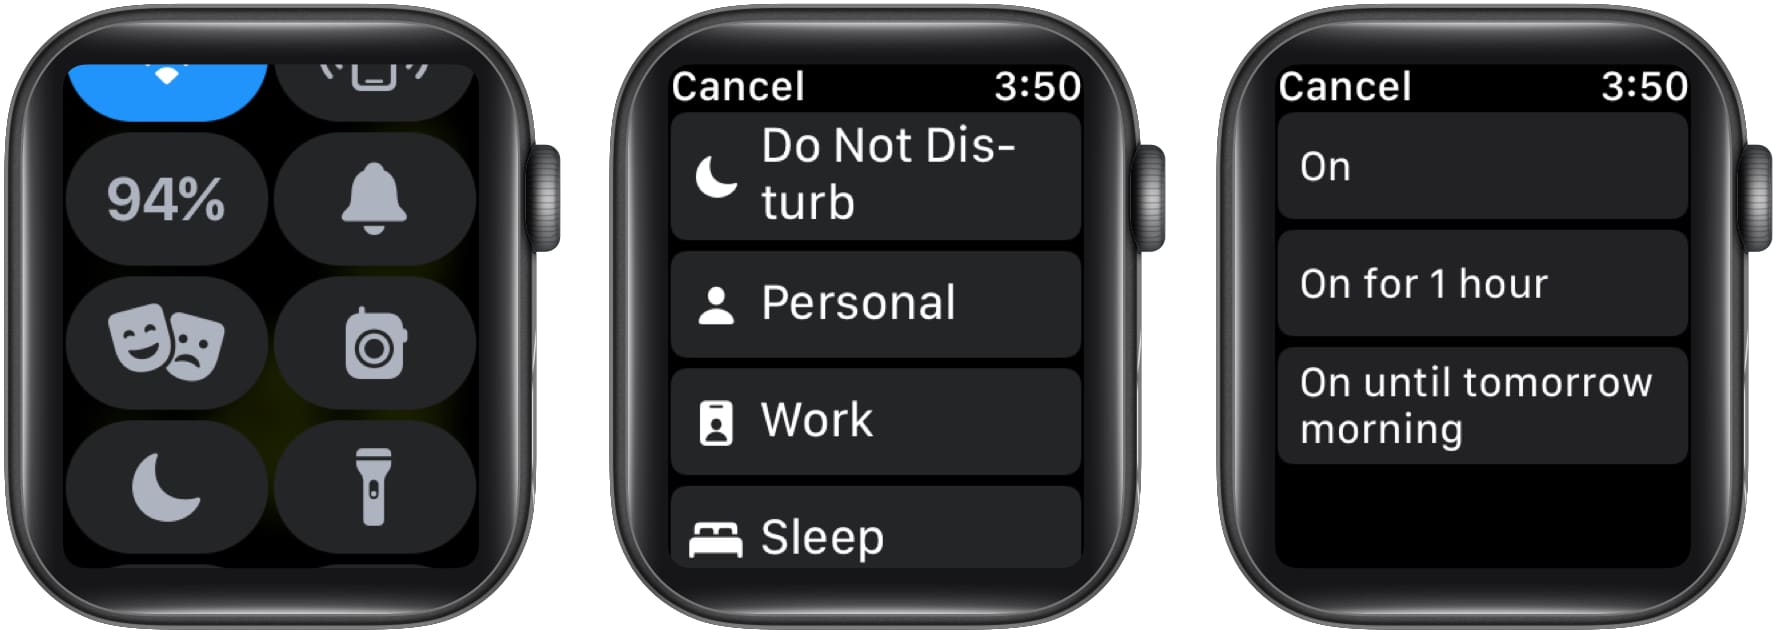 How to turn on Focus on Apple Watch